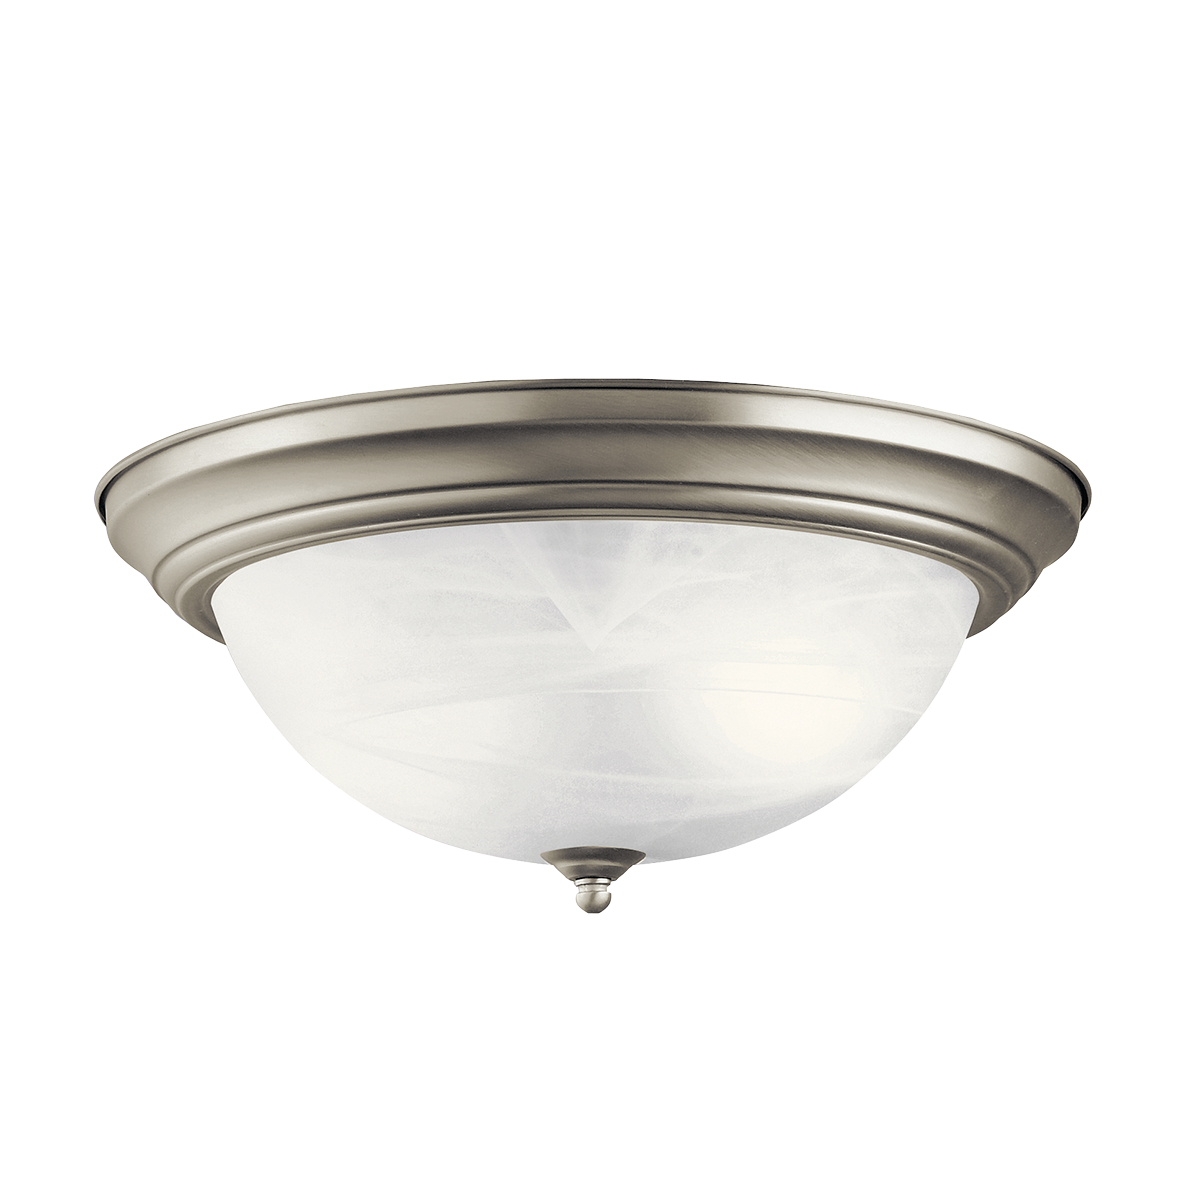 With just the right amount of added detail, this flush mount ceiling fixture provides not only the light you need, but the form as well.  A pleasing, yet unobtrusive look for any room where a functional light is needed. Alabaster swirl glass and Brushed Nickel finish. 3 light. 60 watt max. Diameter 15 ½in., height 6 ½